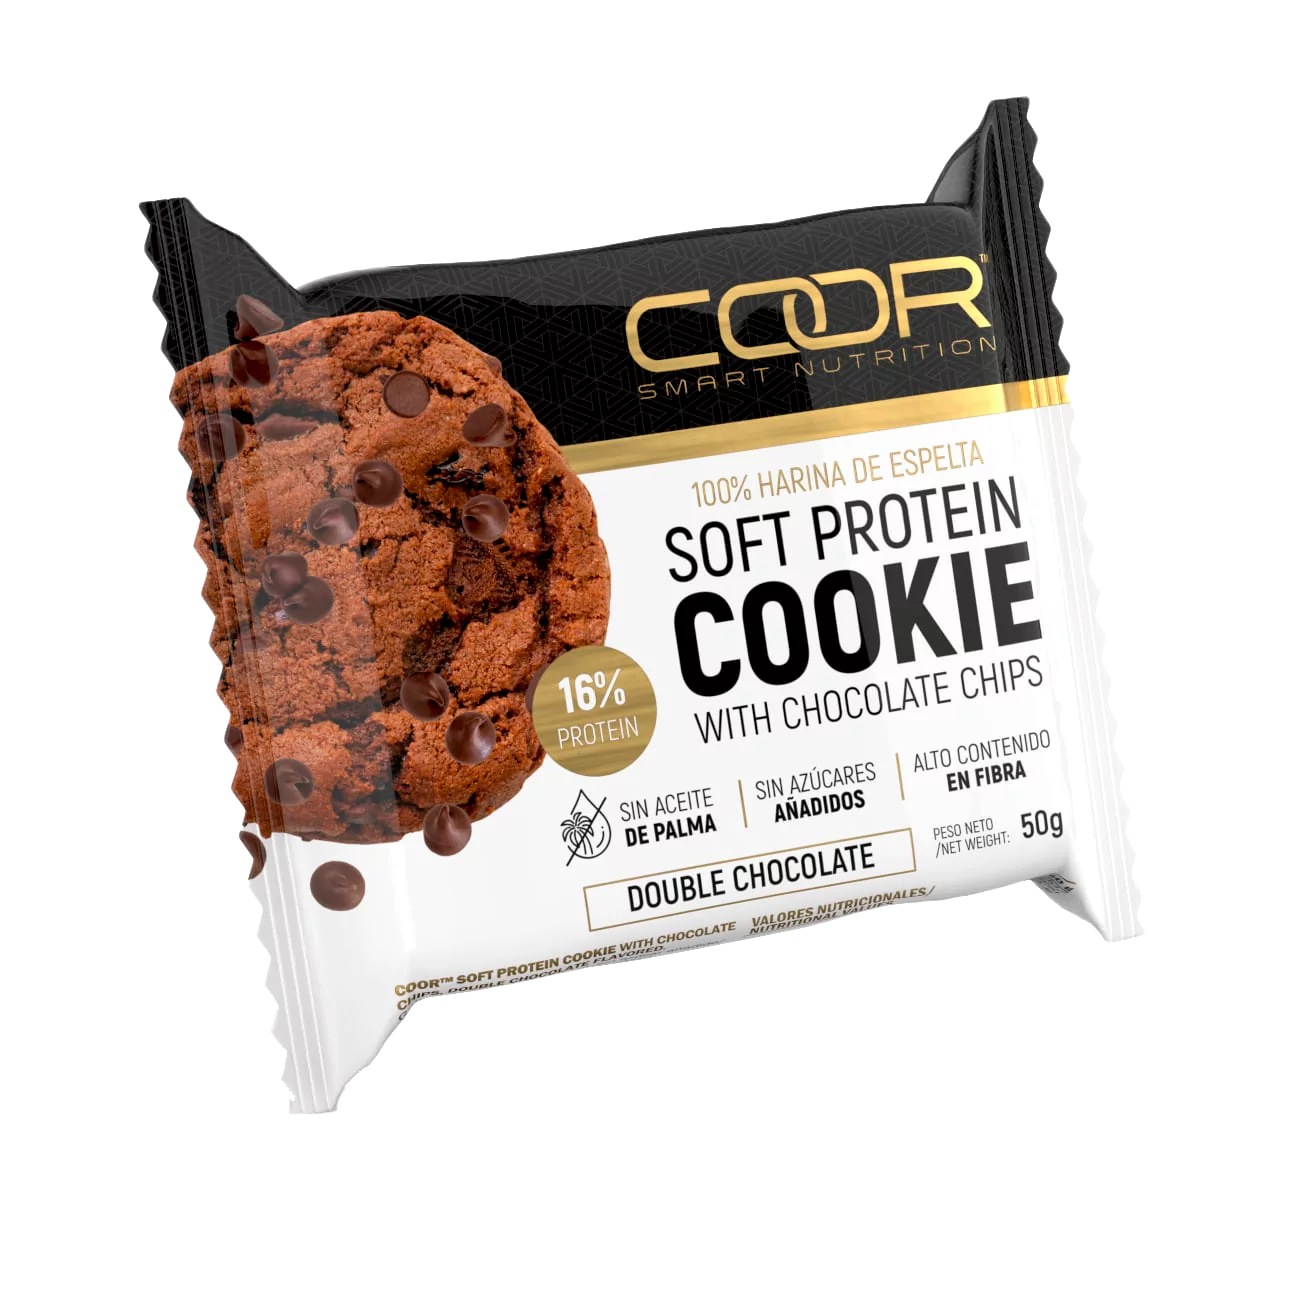 Soft protein Cookie Doble Chocolate Coor